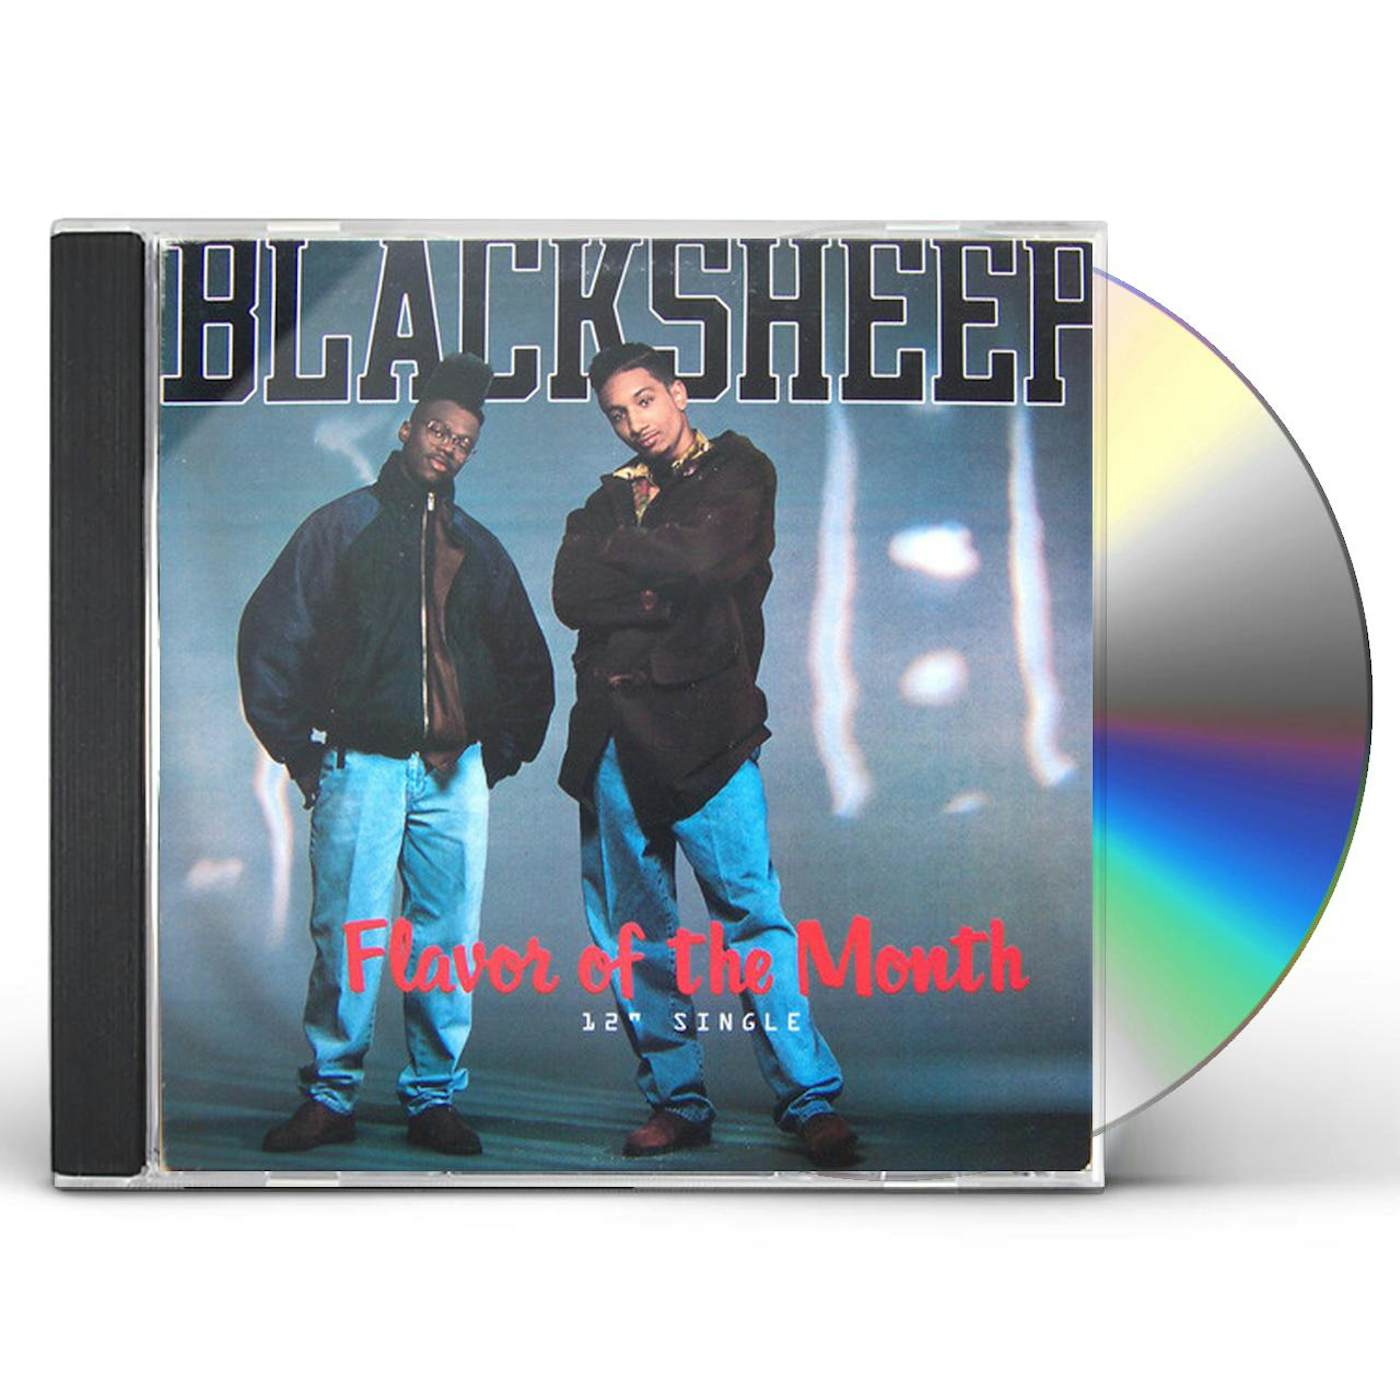 Black Sheep Flavor Of The Month Vinyl Record